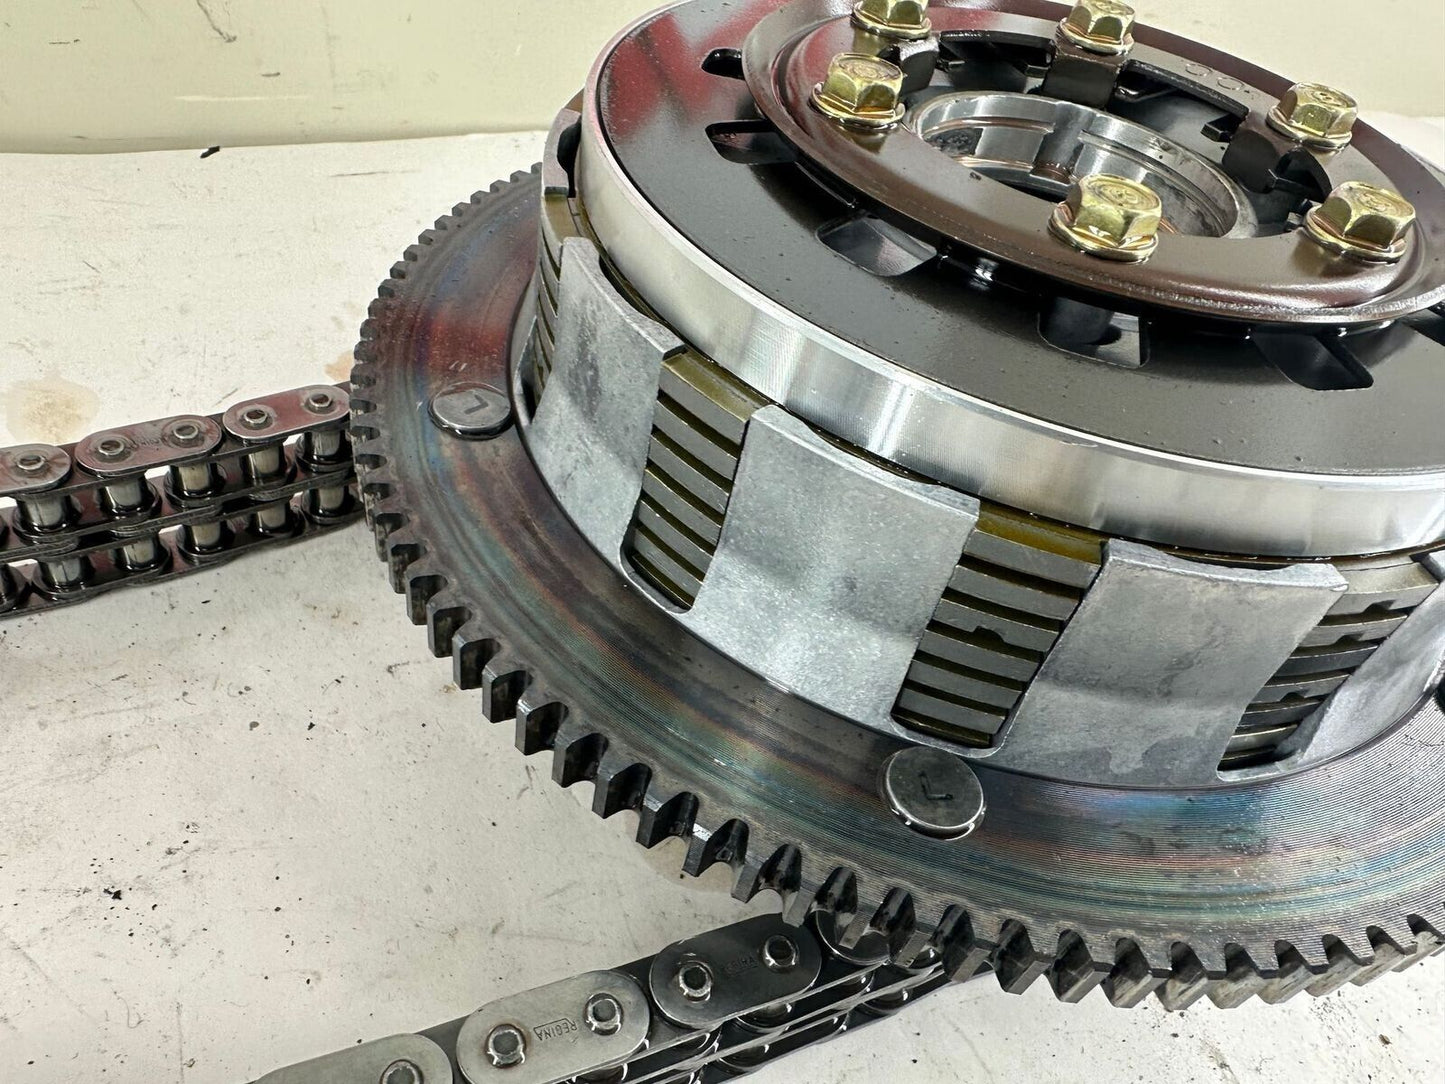 2000 HARLEY FLH ELECTRA GLIDE Complete Primary Clutch Chain Gears